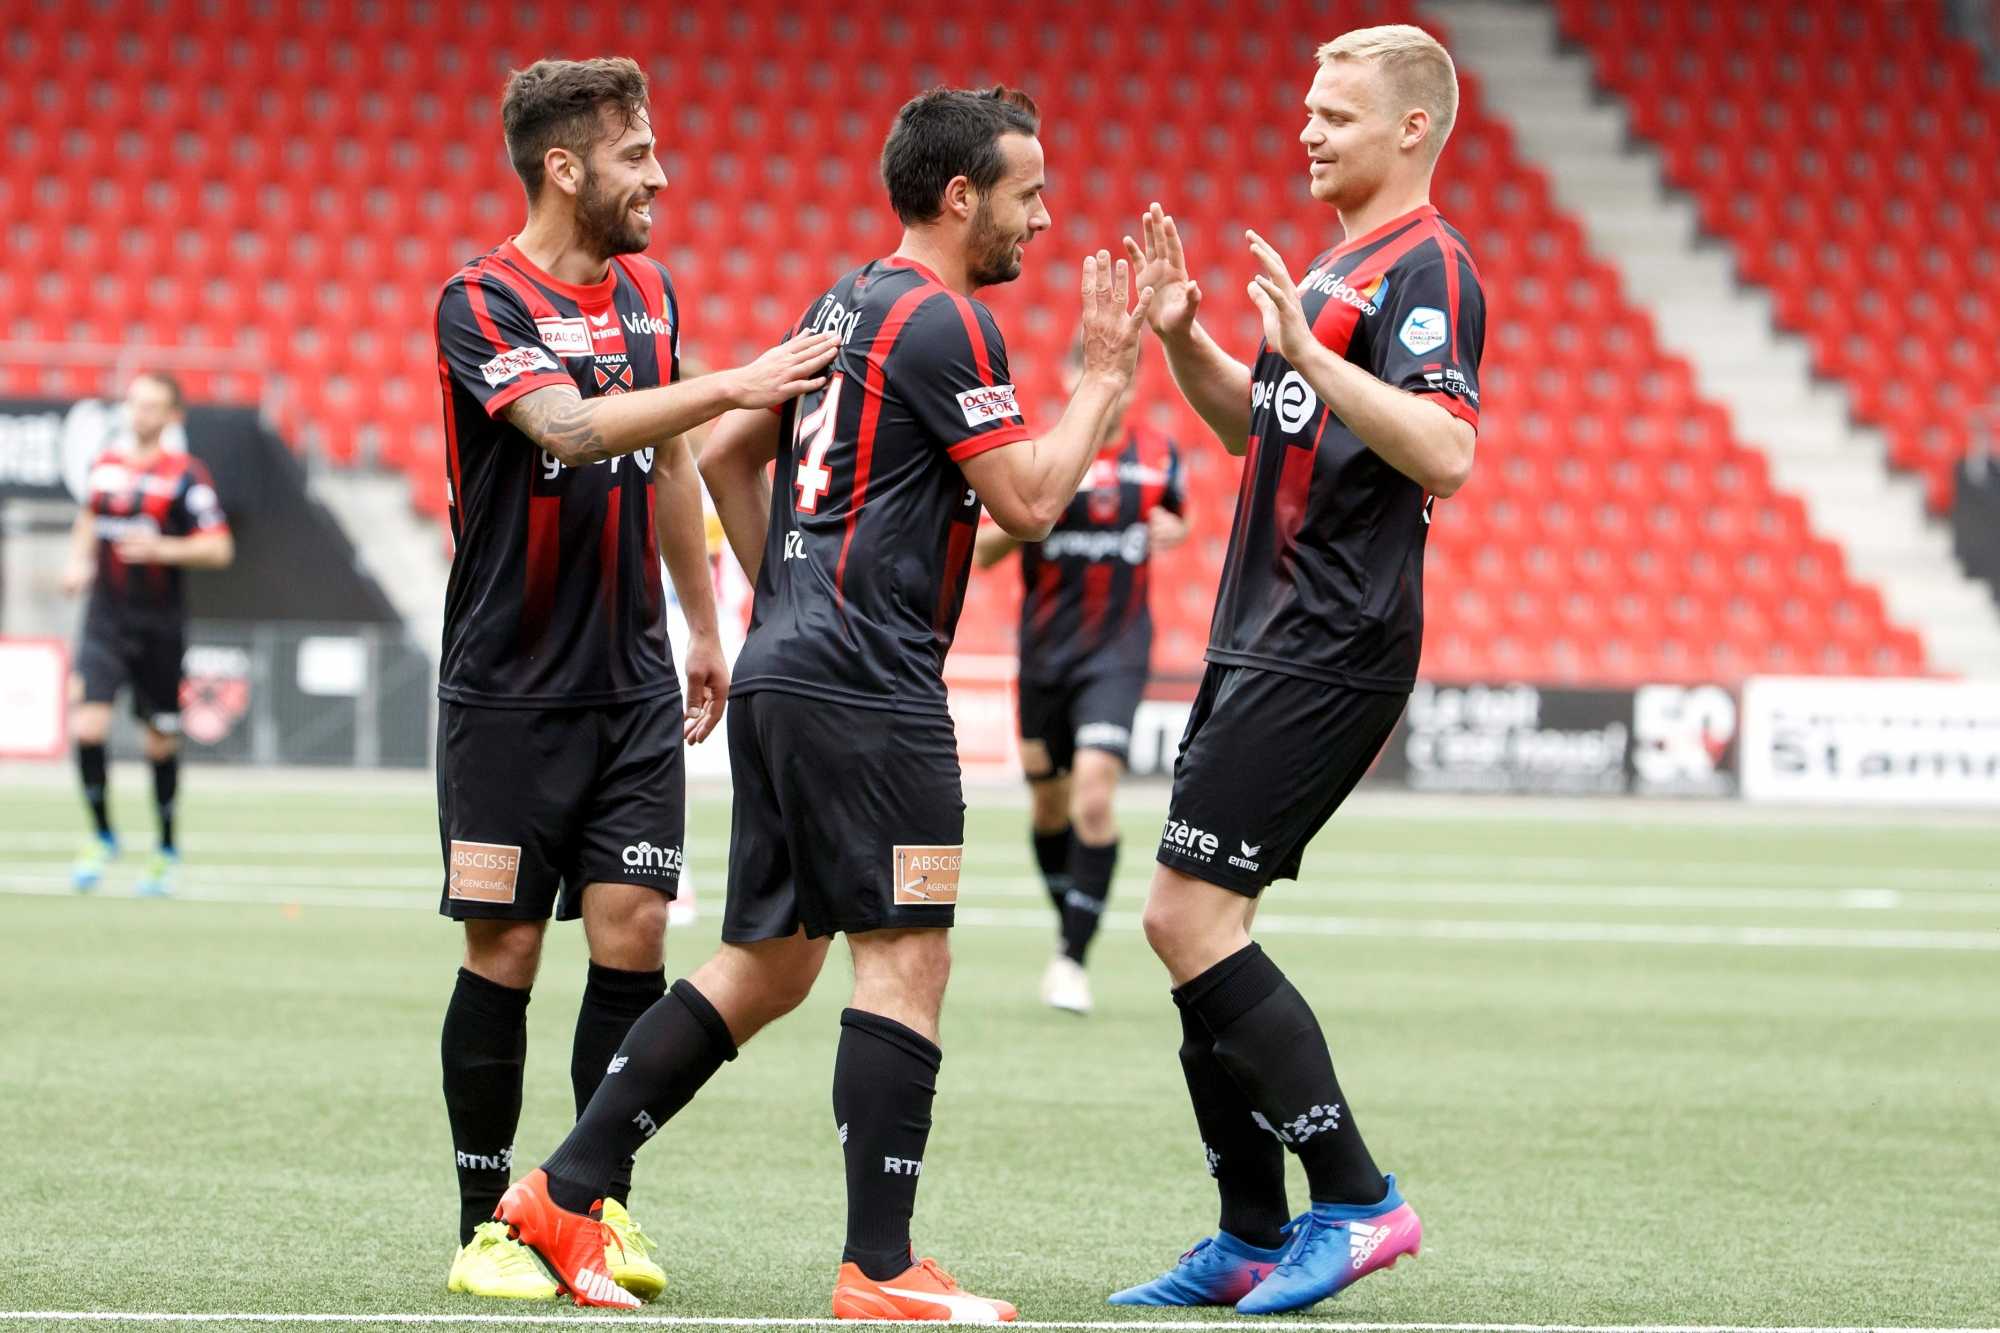 Xamax's midfielder Raphael Nuzzolo, center, celebrates his goal with teammates midfielder Max Veloso, left, and forward Gaetan Karlen, right , during the Challenge League soccer match of Swiss Championship between Neuchatel Xamax FCS and FC Chiasso, at the Stade de la Maladiere stadium, in Neuchatel, Switzerland, Monday, April 17, 2017. (KEYSTONE/Salvatore Di Nolfi) SWITZERLAND SOCCER XAMAX CHIASSO